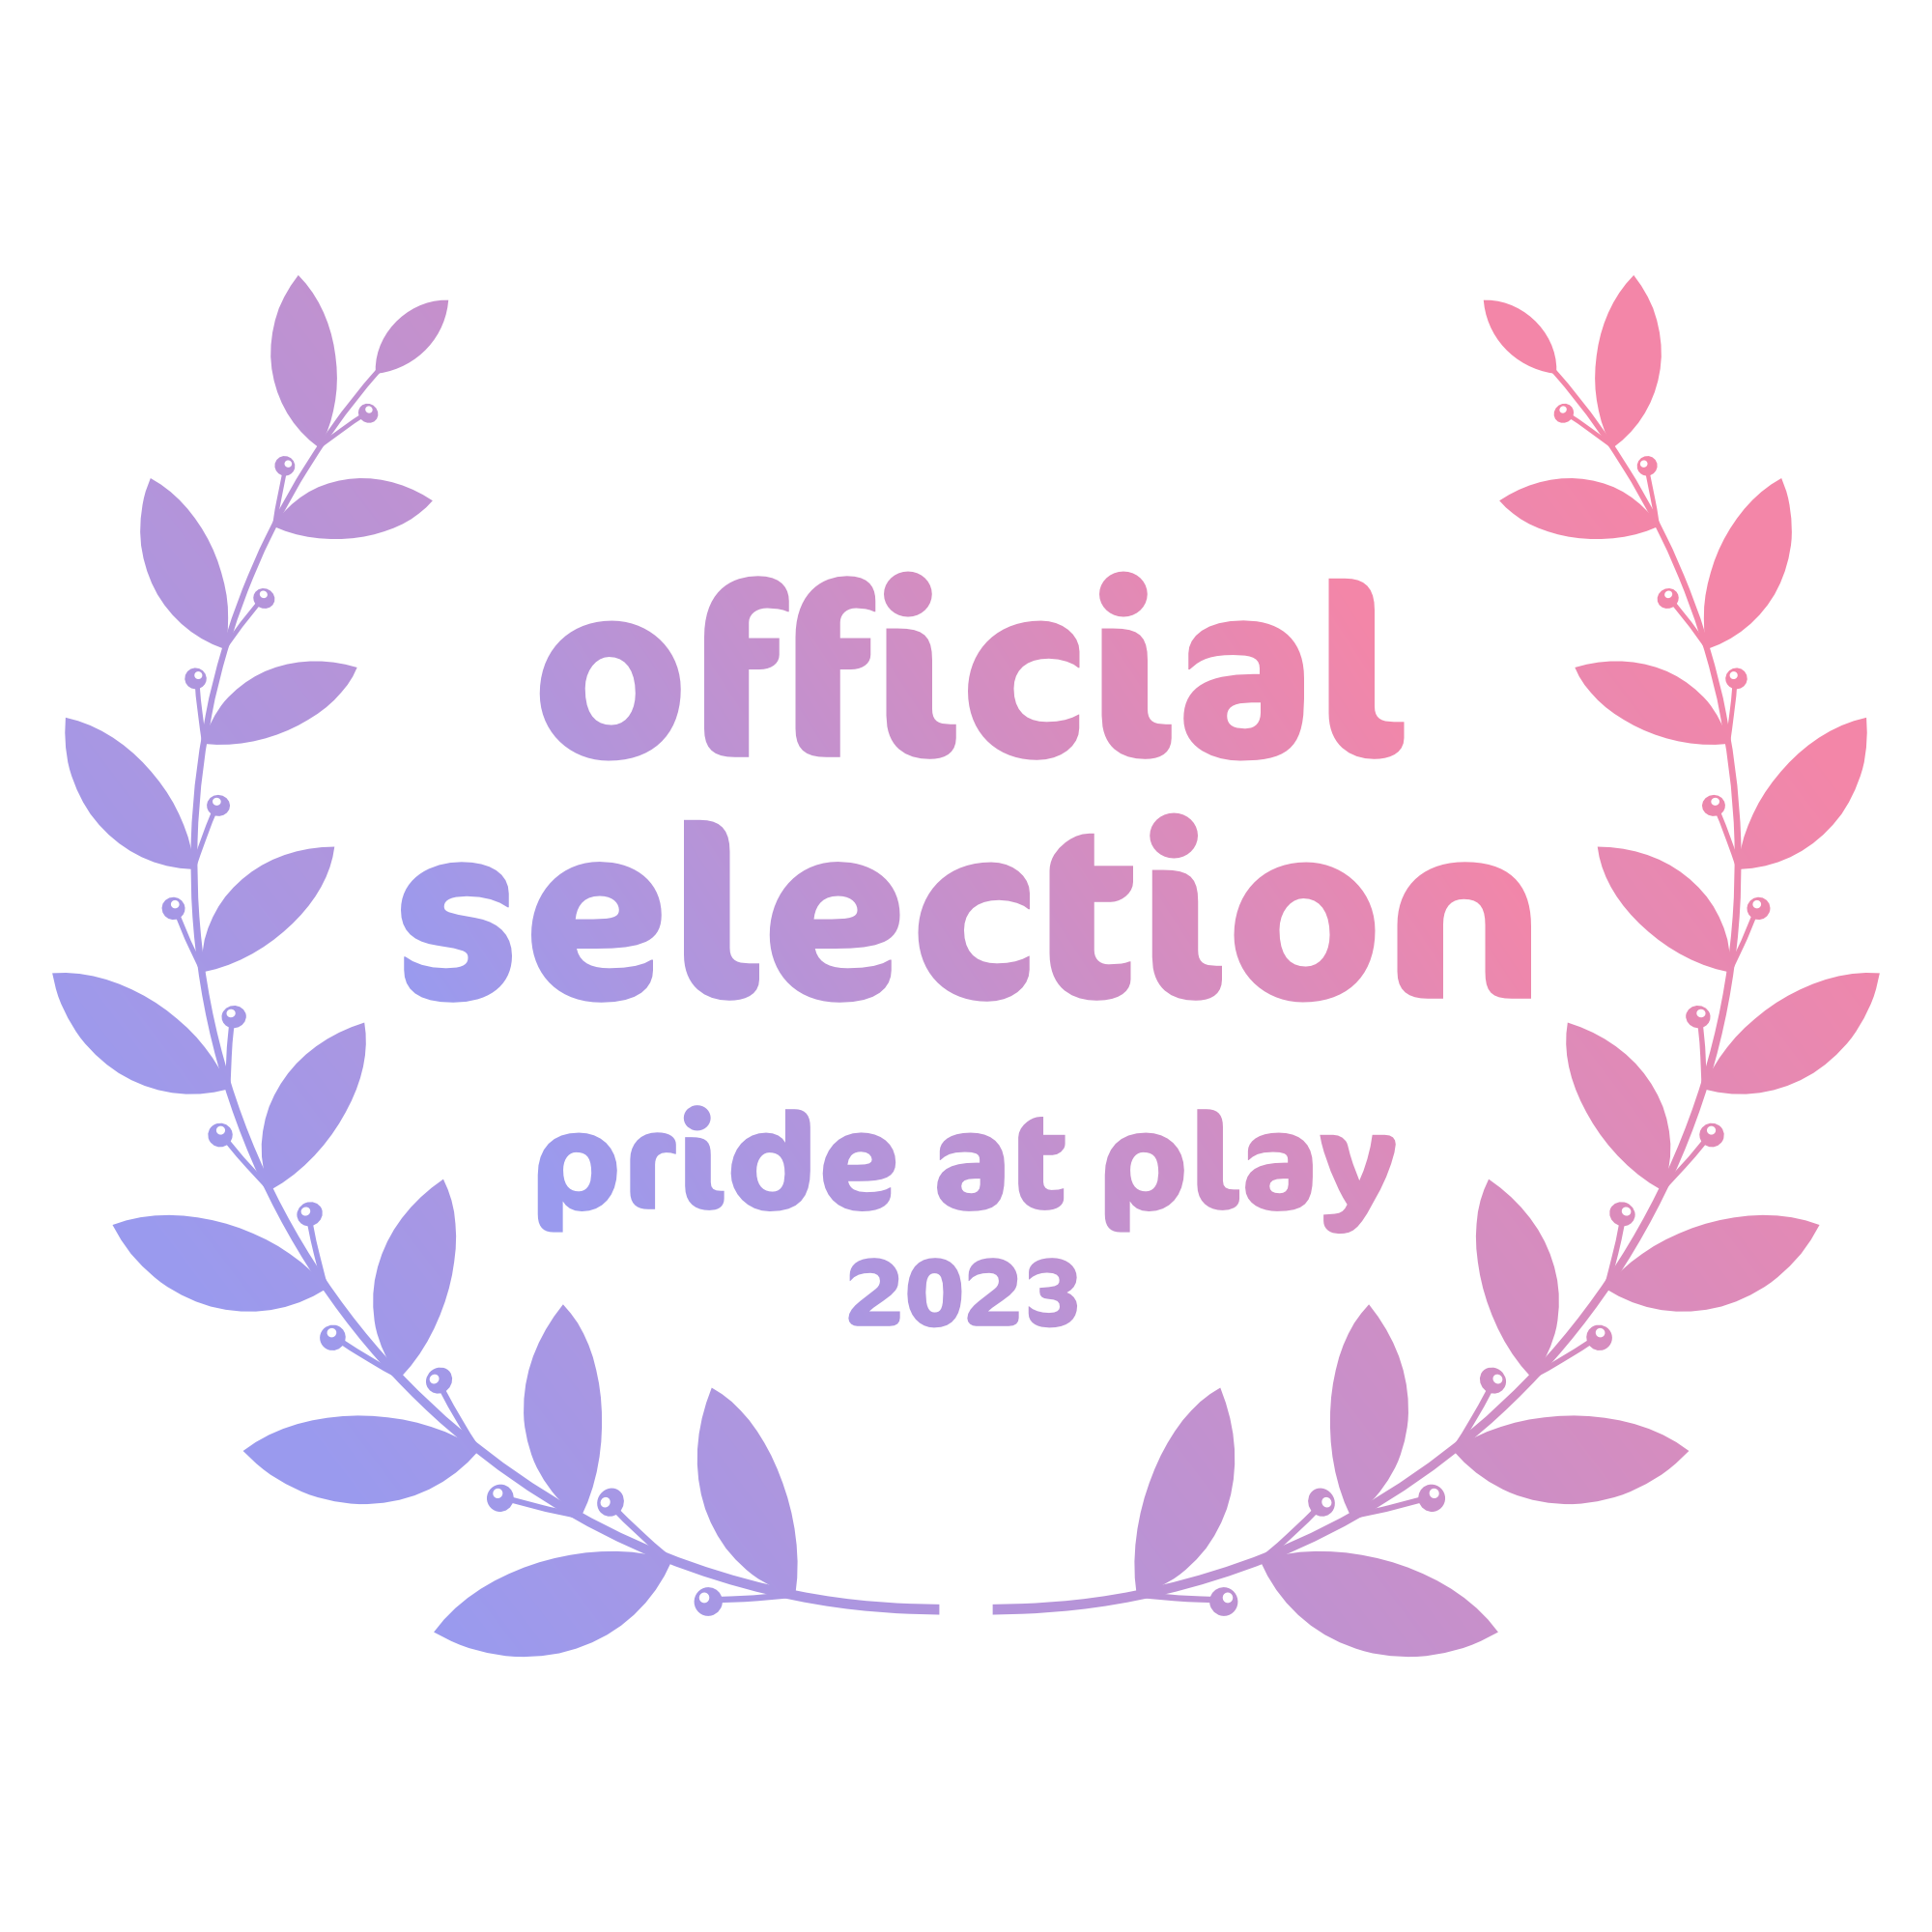 Official selection, pride at play 2023